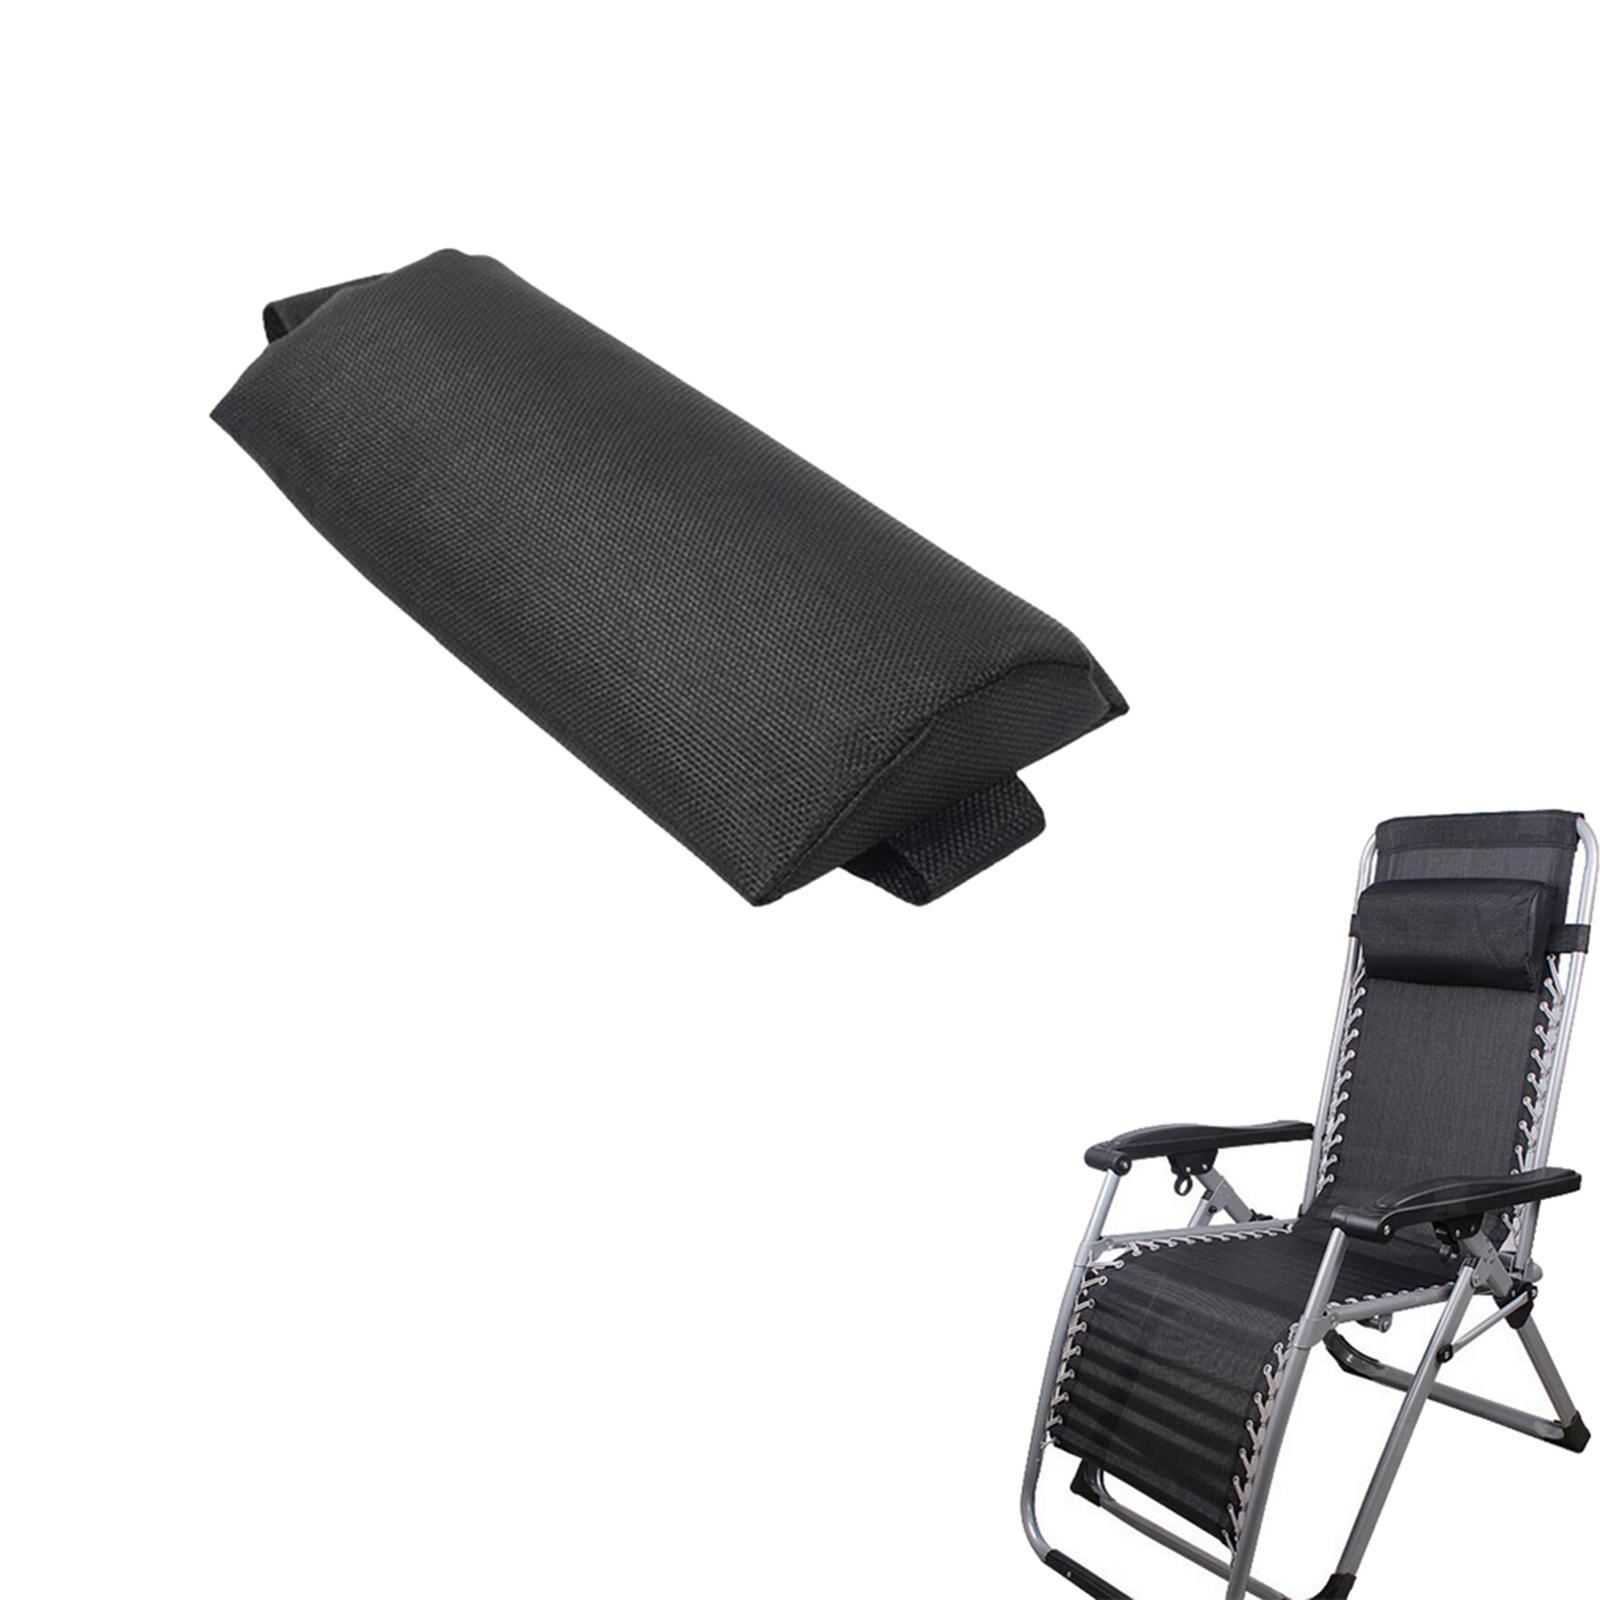 Removable Padded Headrest Pillow Replacement for Folding Beach Lounge ...